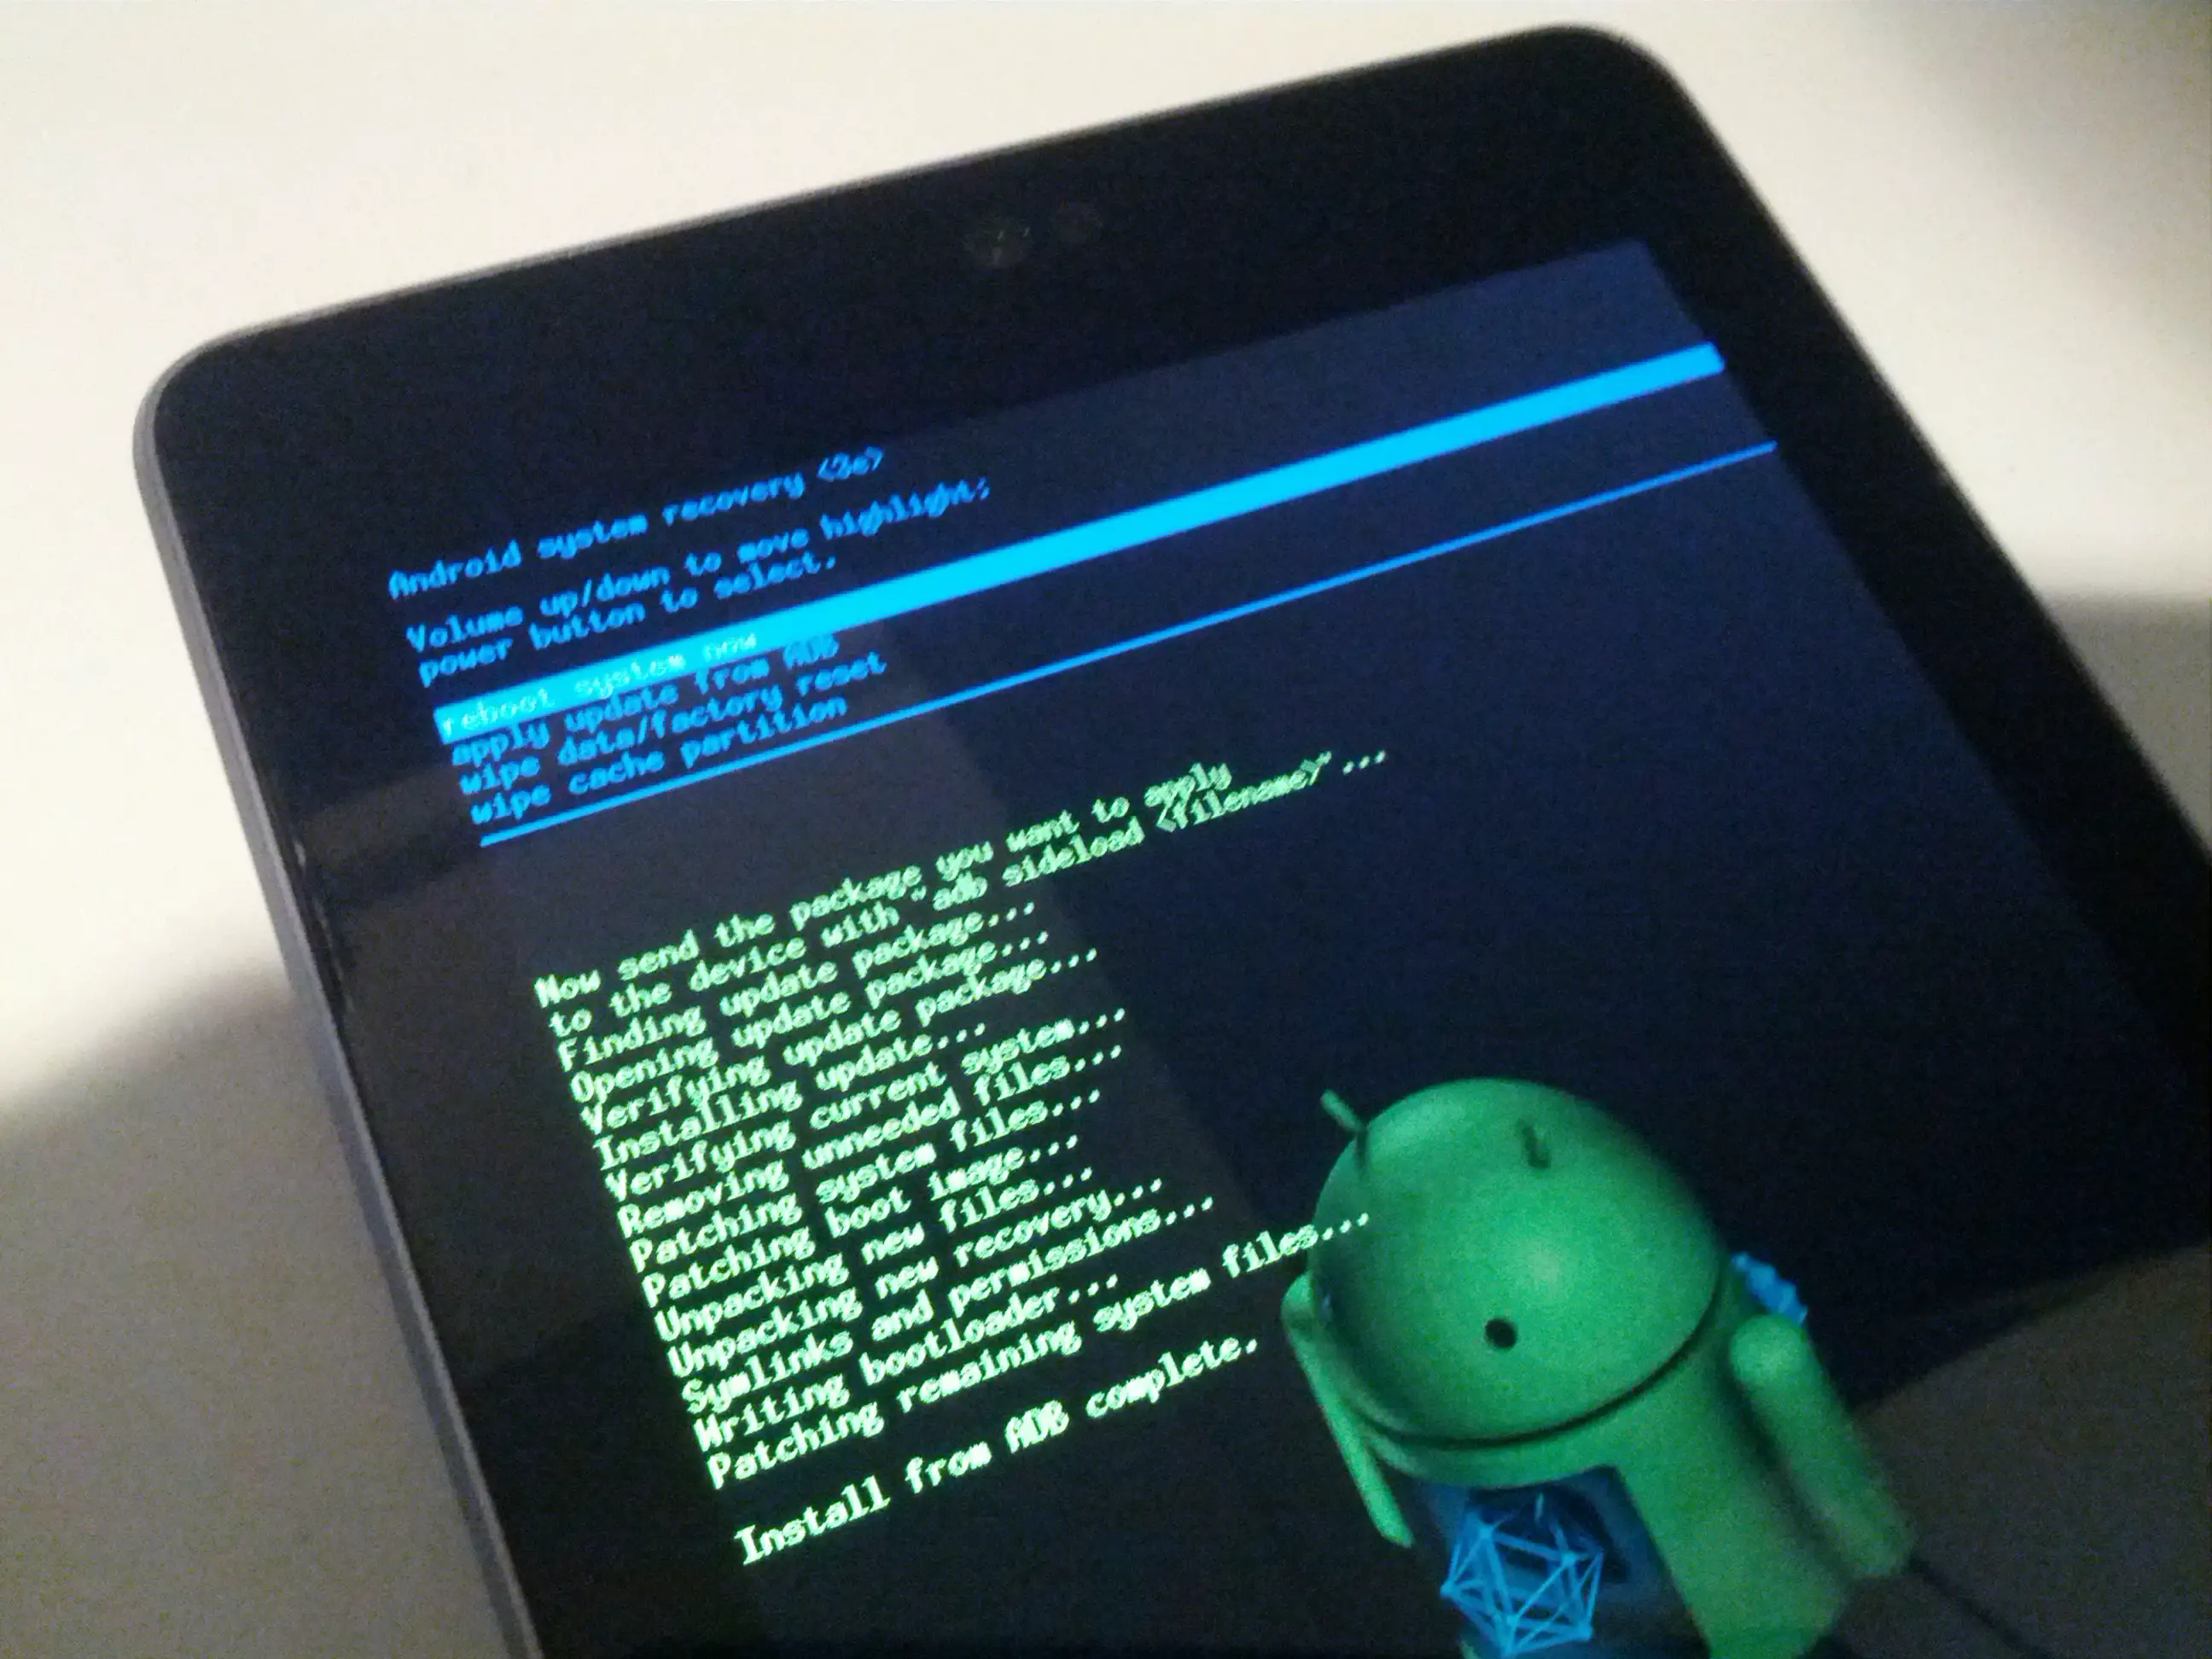 nexus 7 sideload - for some reason we don't have an alt tag here